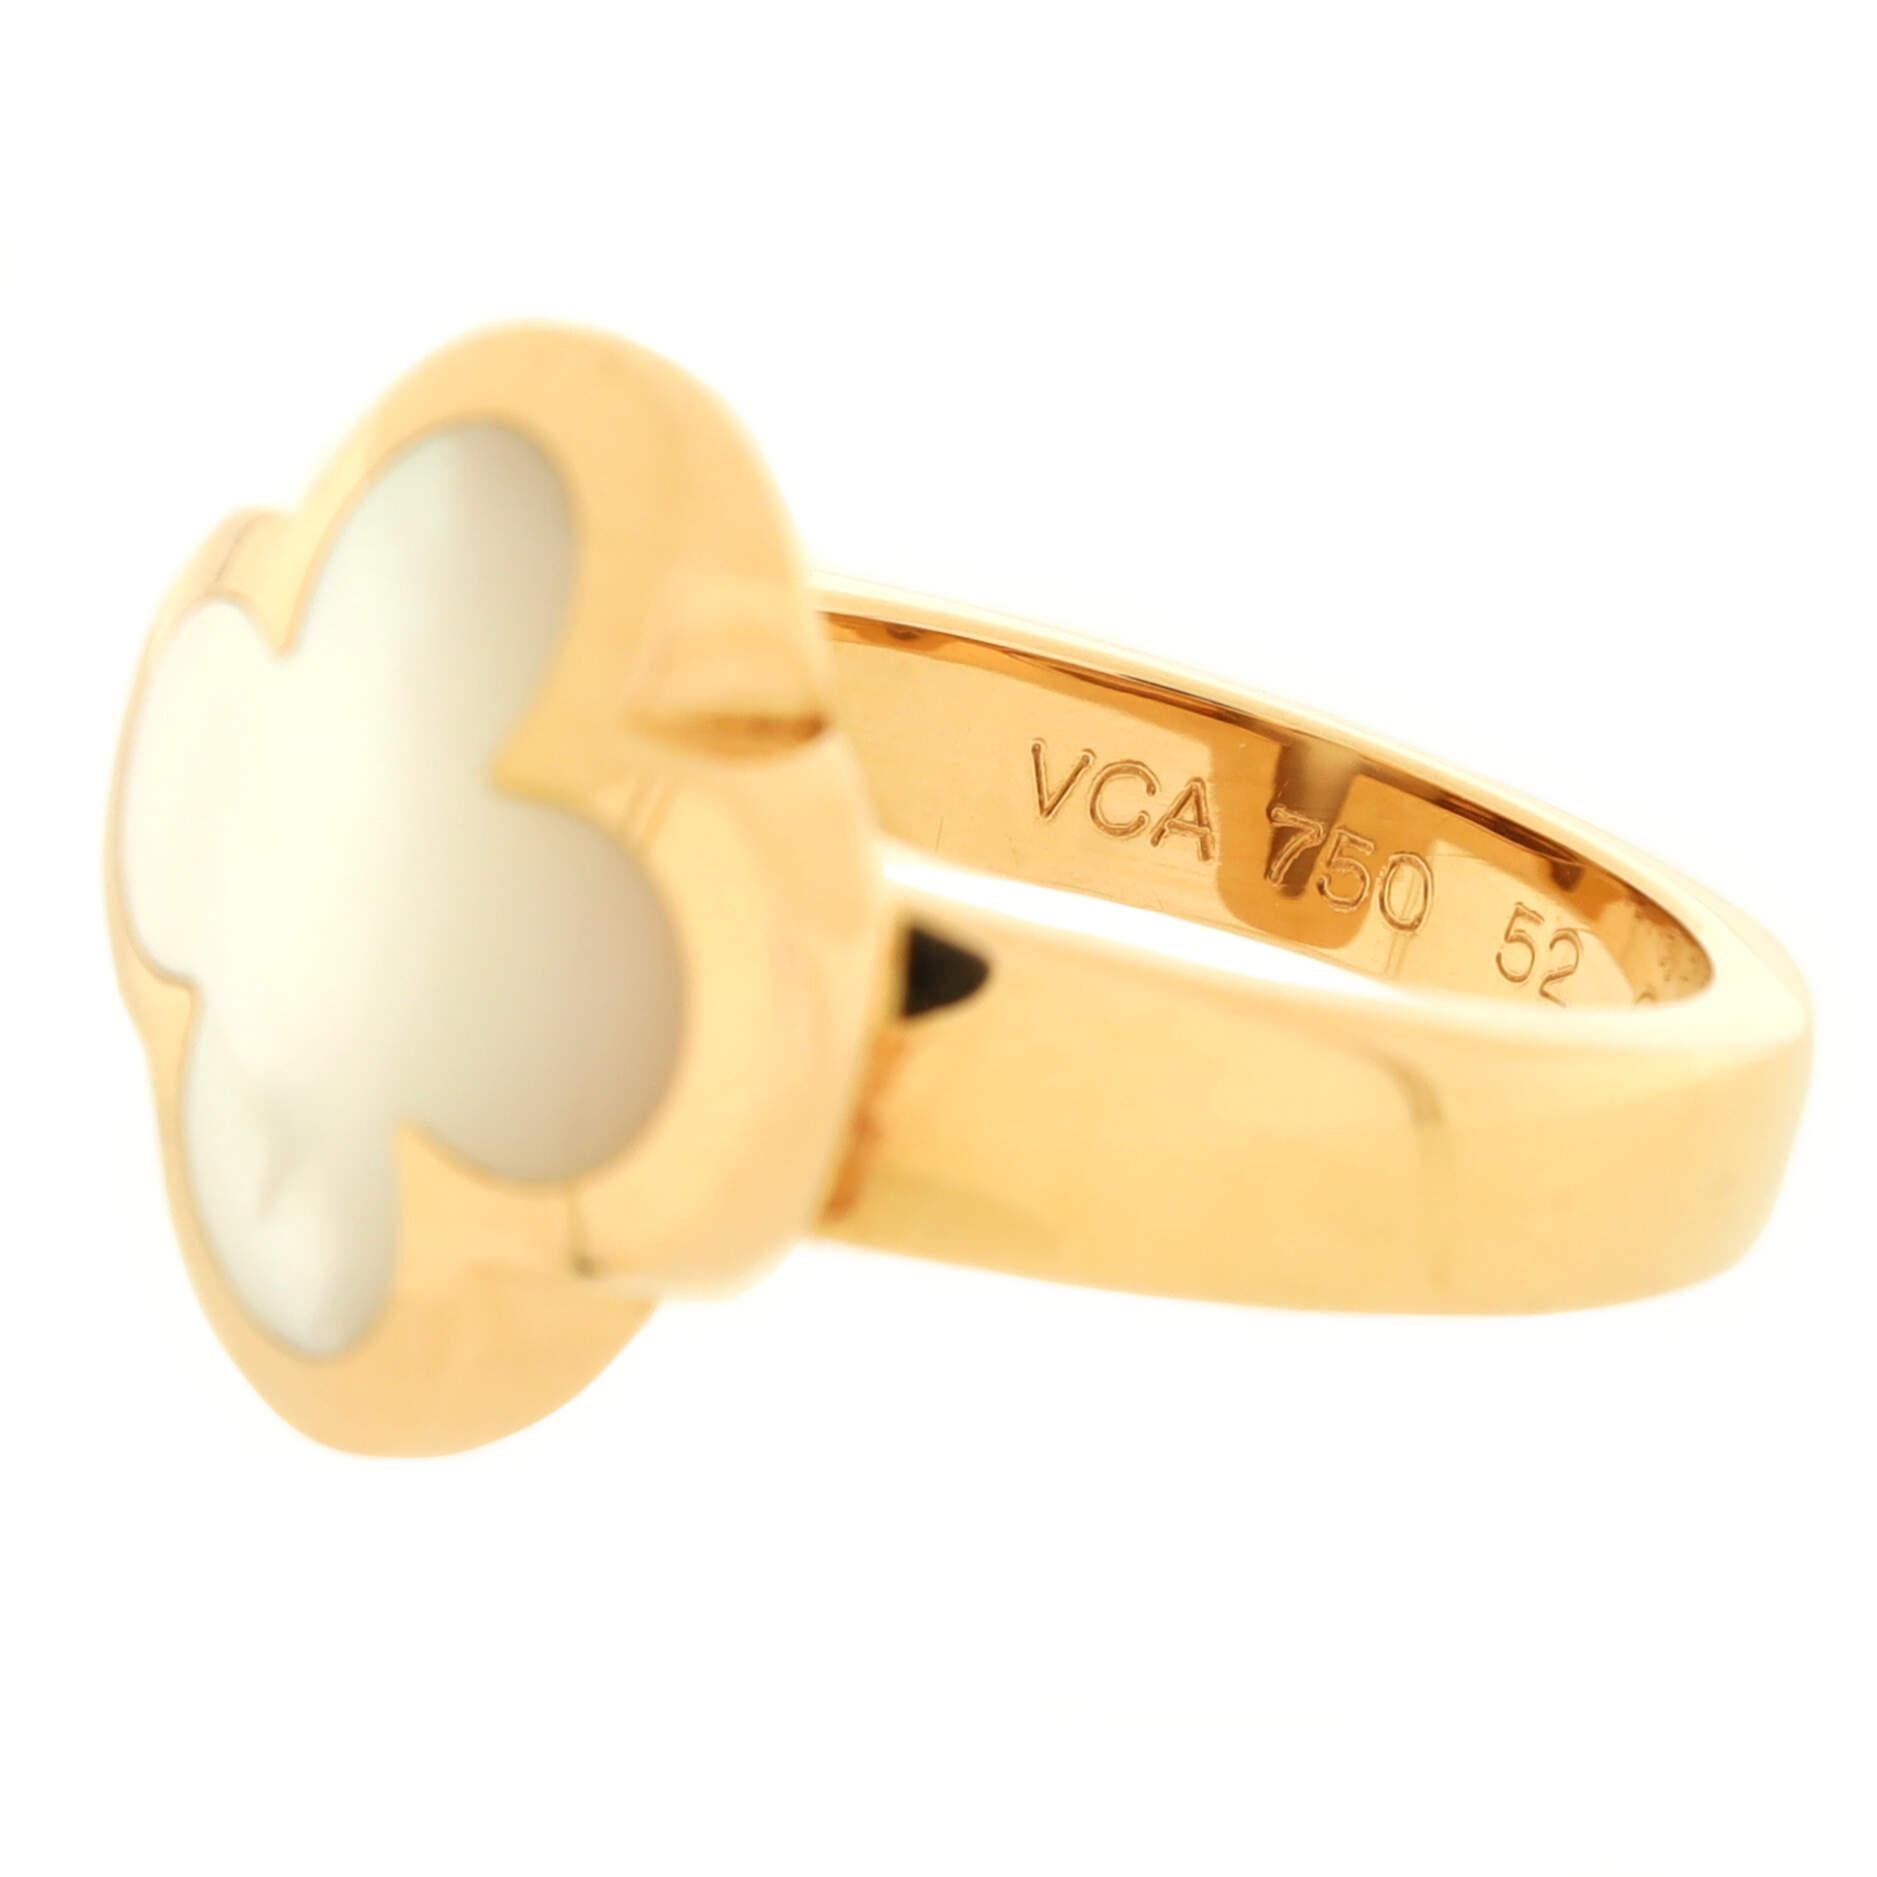 Women's or Men's Van Cleef & Arpels Pure Alhambra Ring 18K Yellow Gold and Mother of Pearl